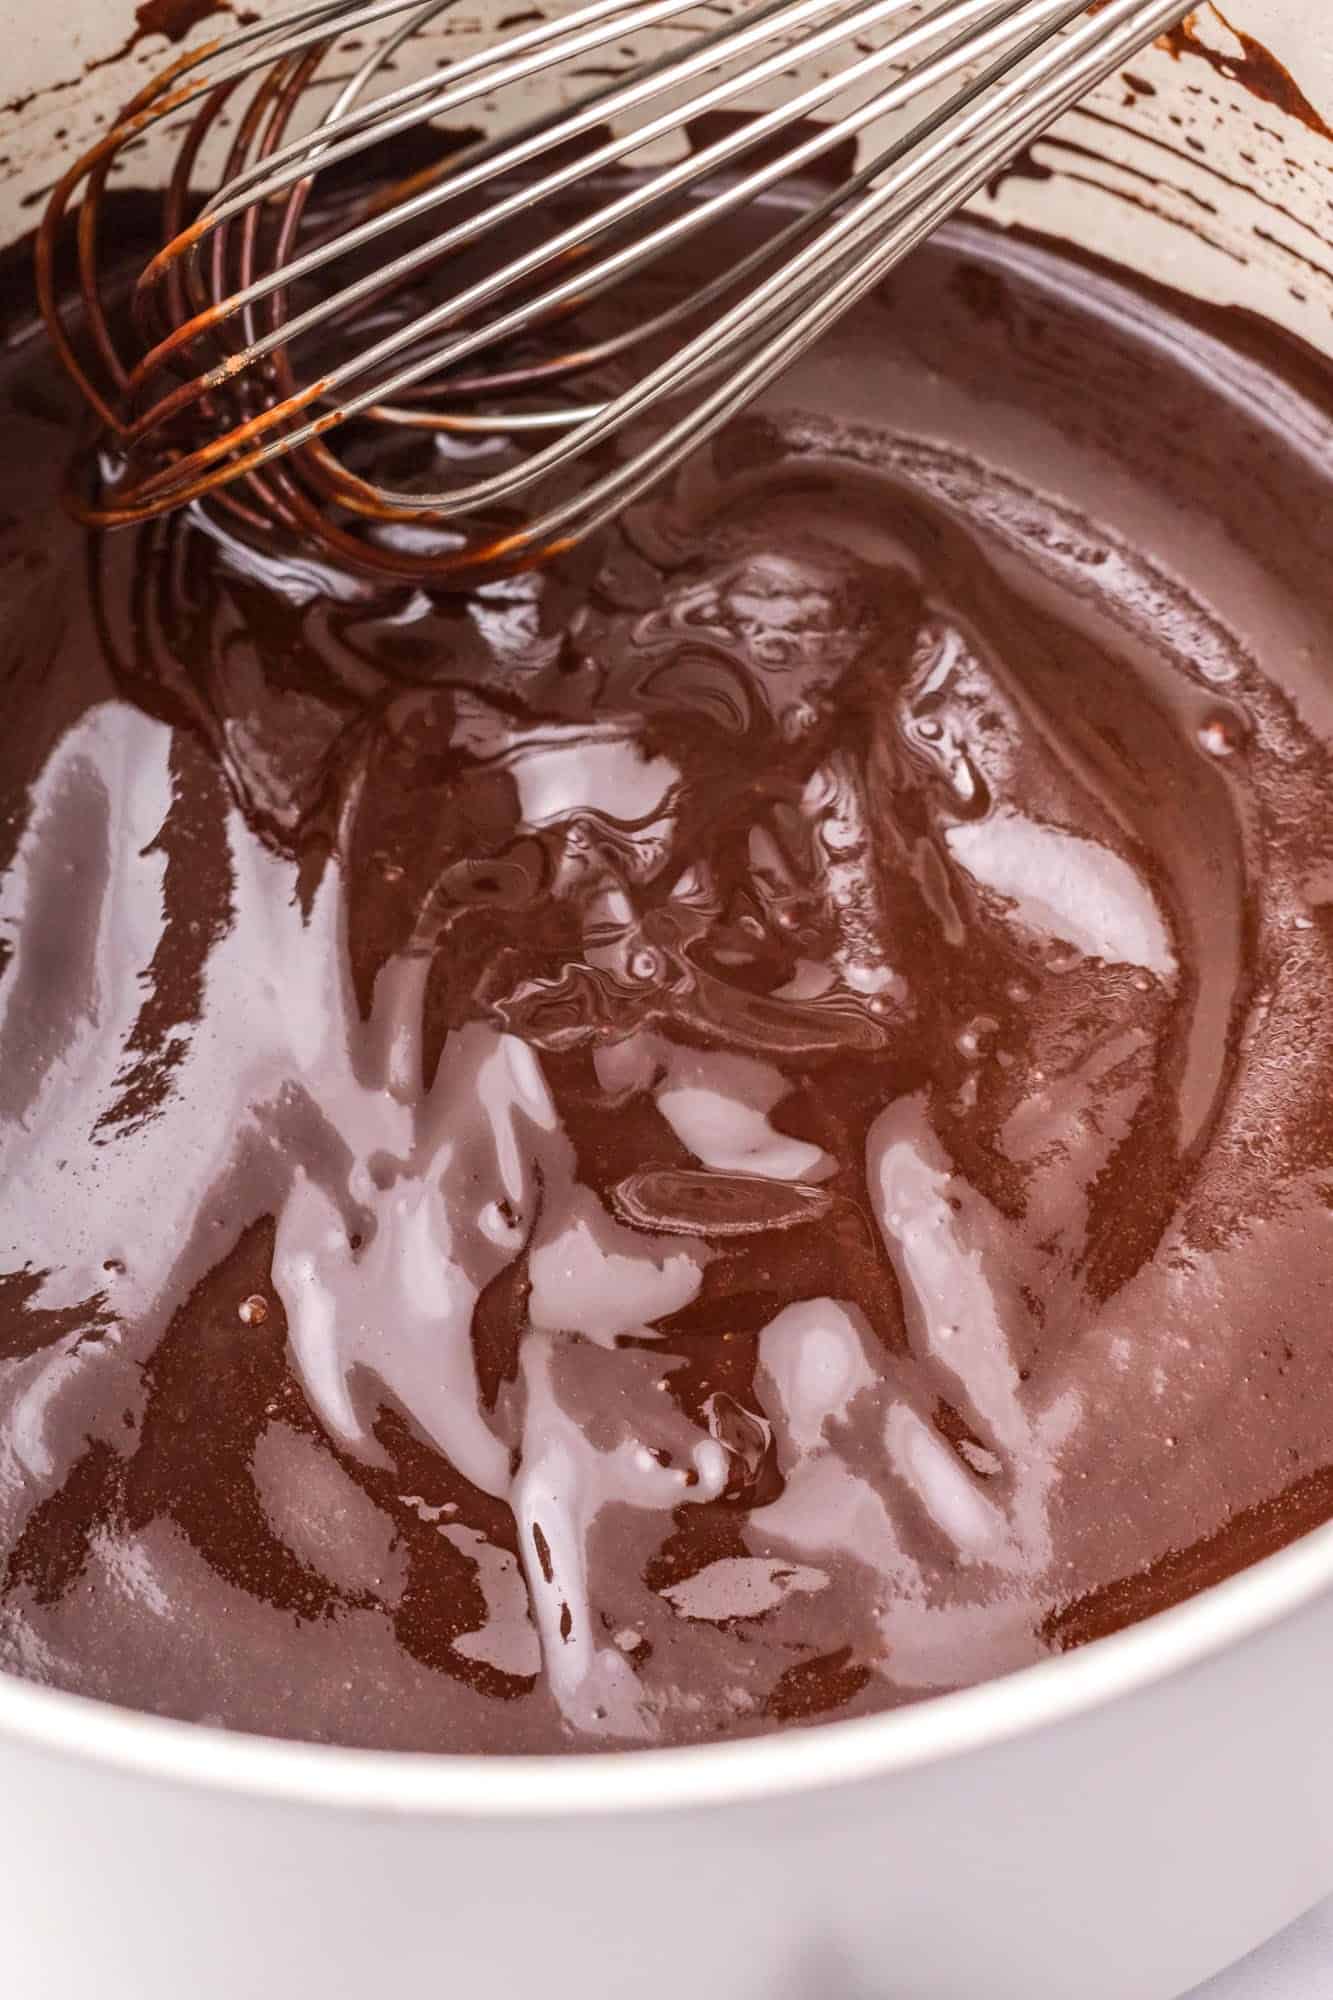 butter and cocoa powder melted in a saucepan with a whisk.